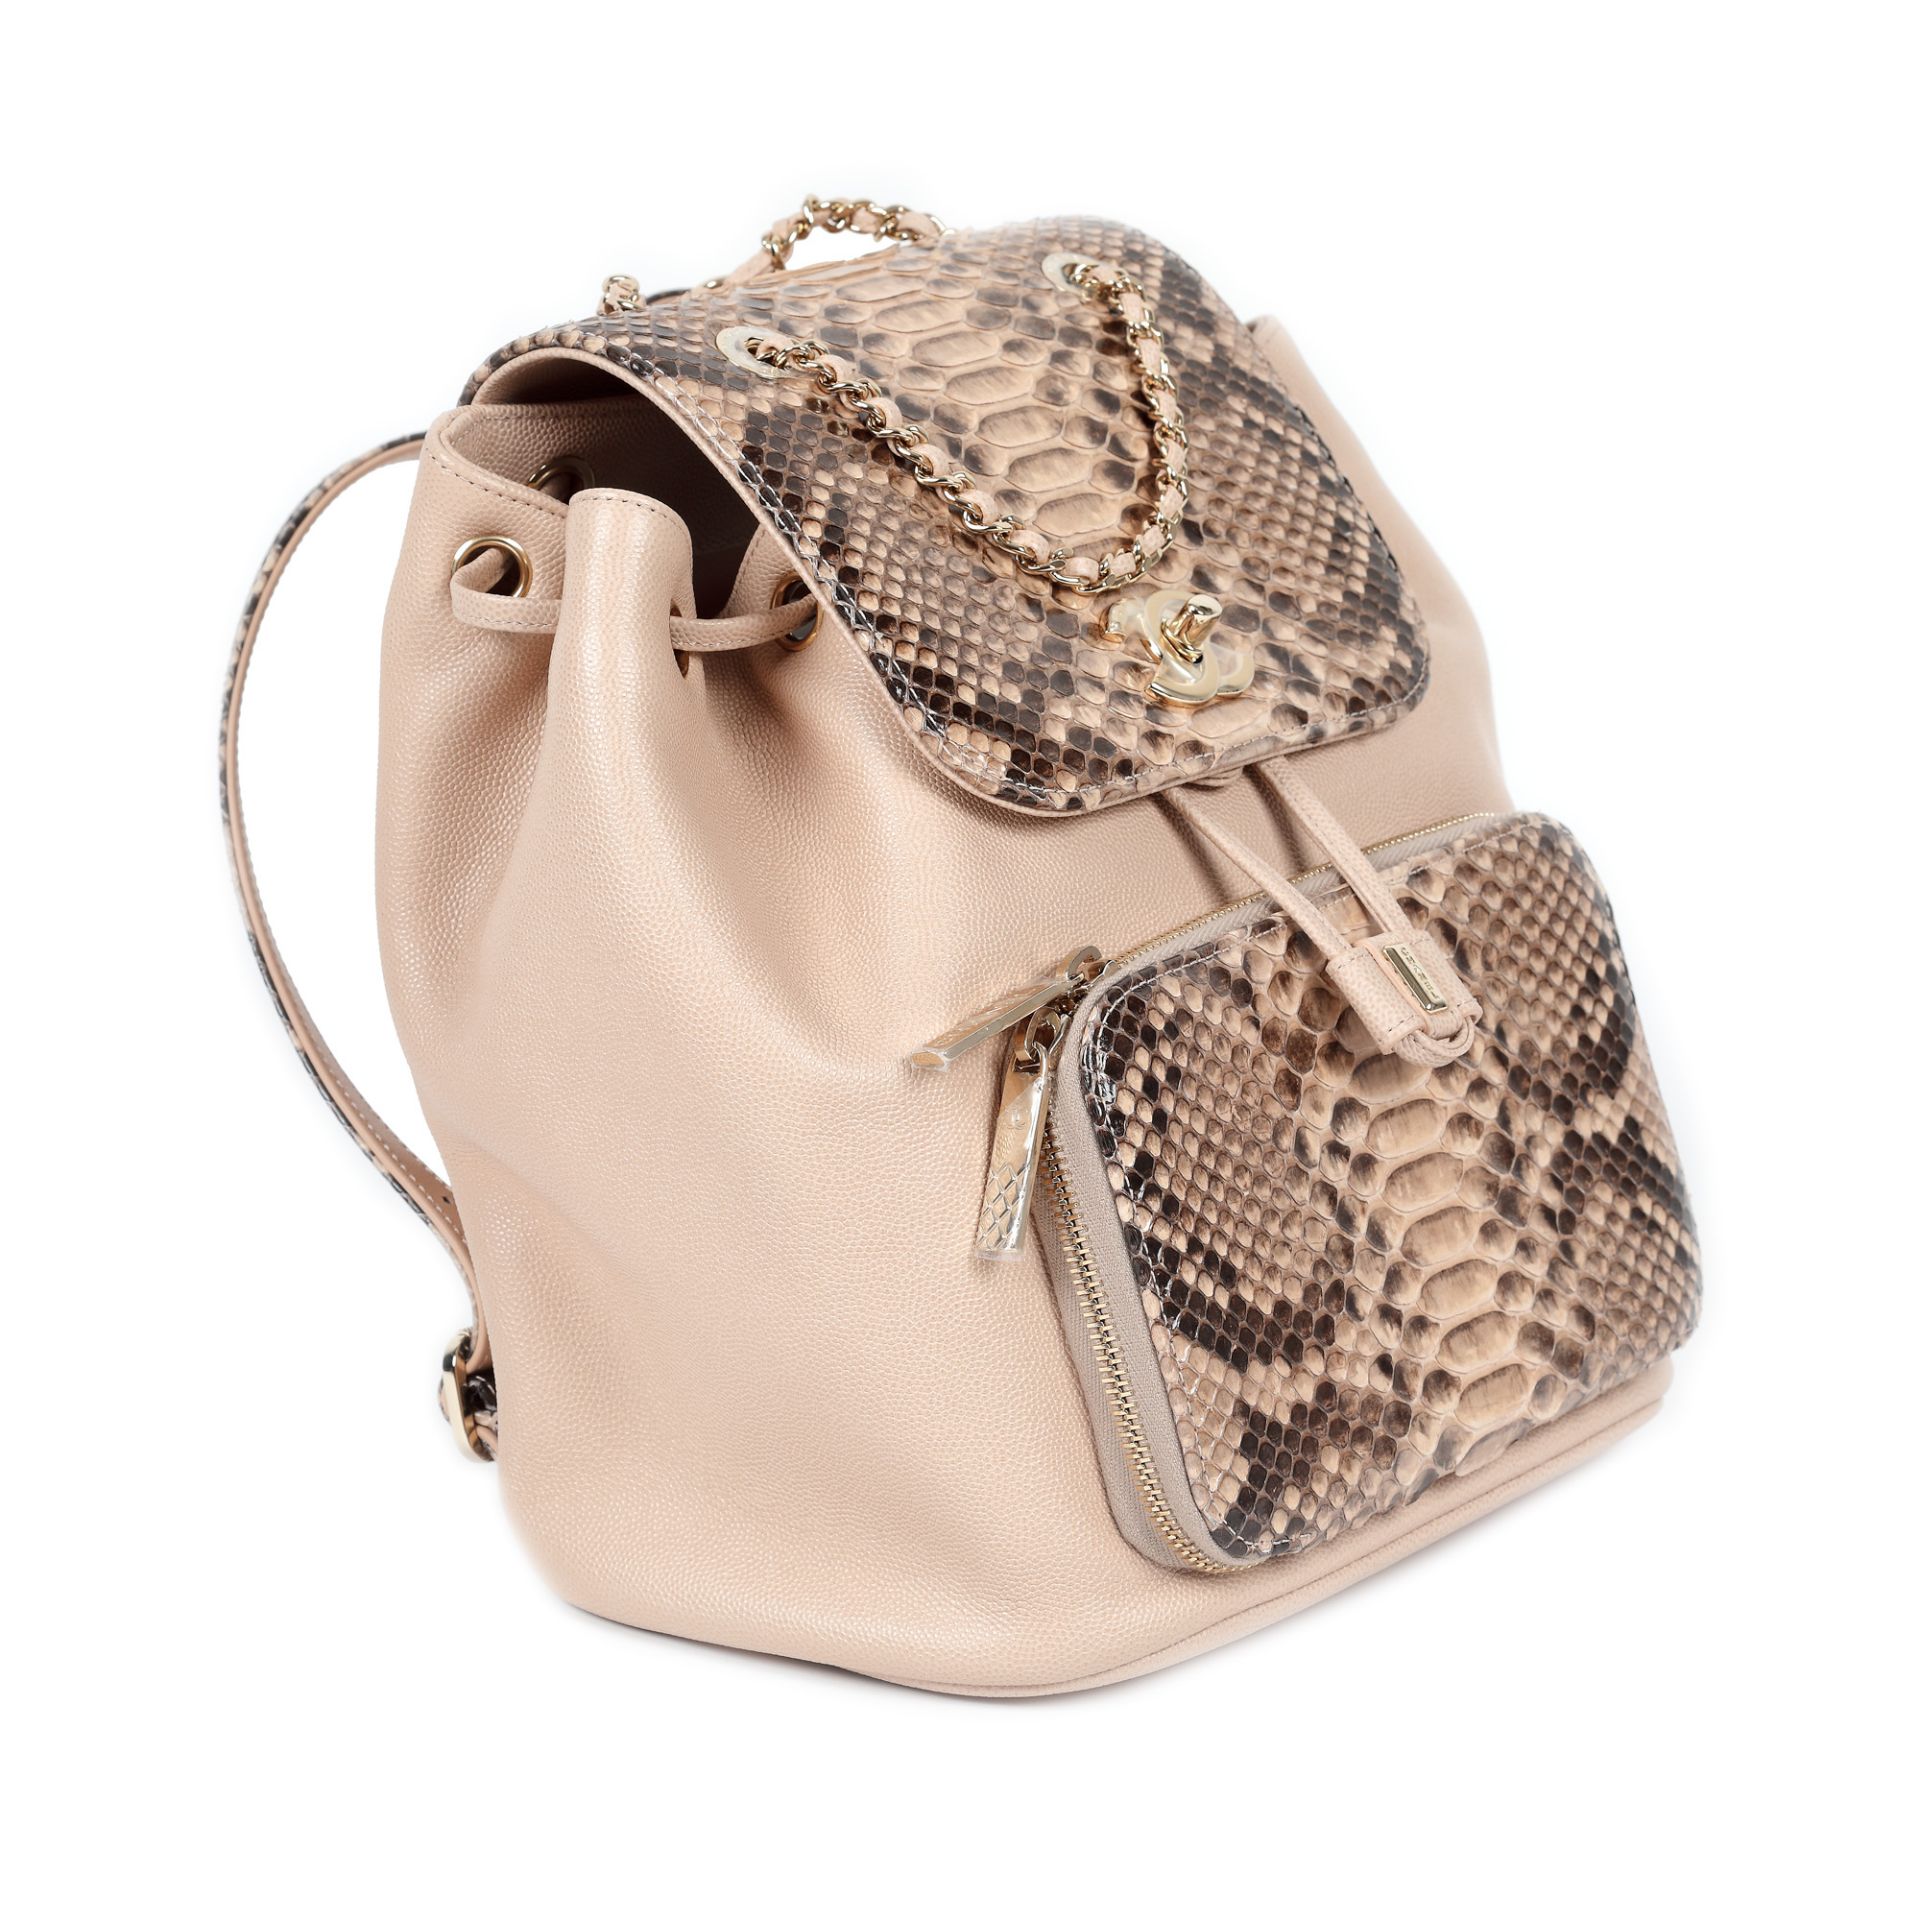 "Business Affinity Backpack" - Chanel backpack, caviar leather and python leather - Image 5 of 6